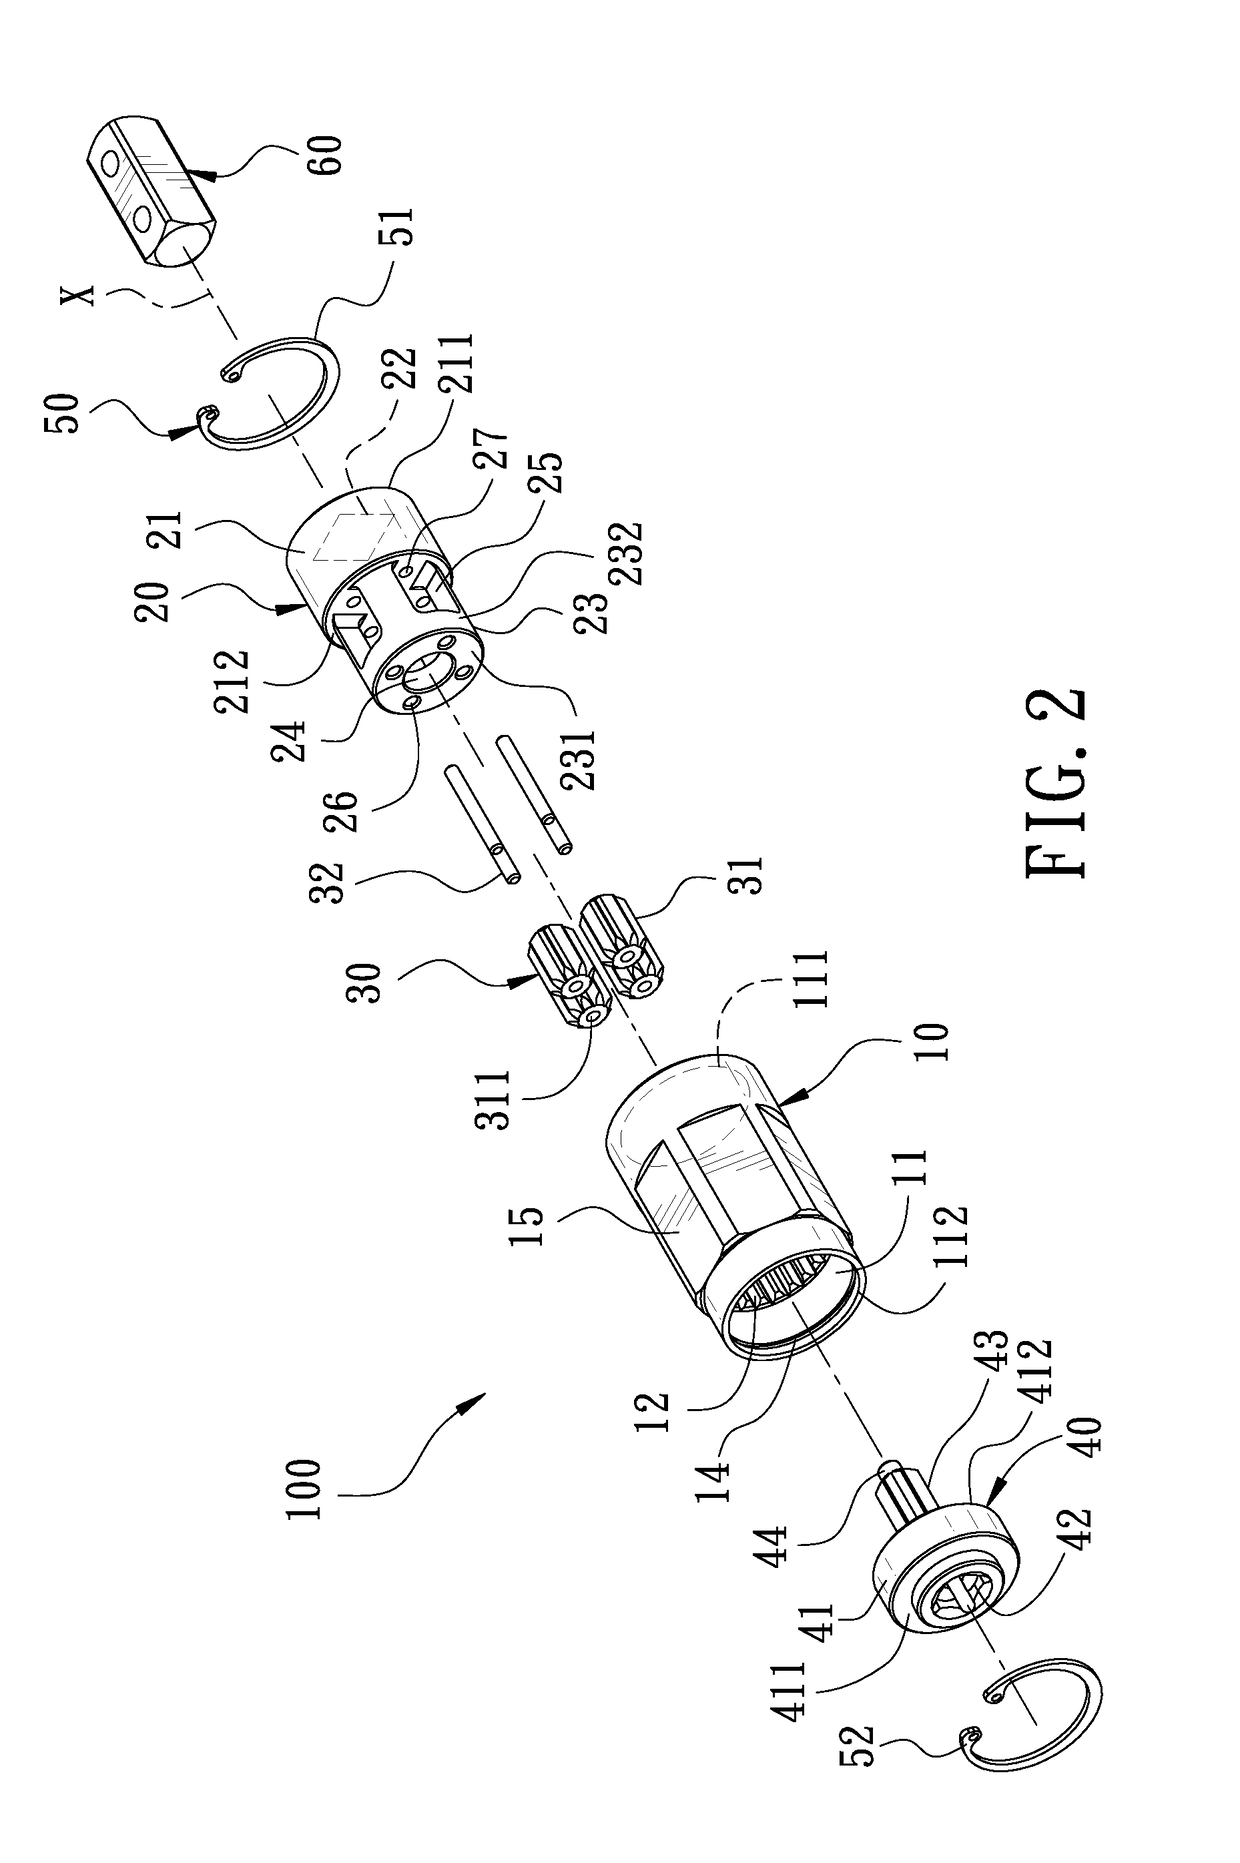 Hand tool adapter capable of increasing output torque or rotational speed